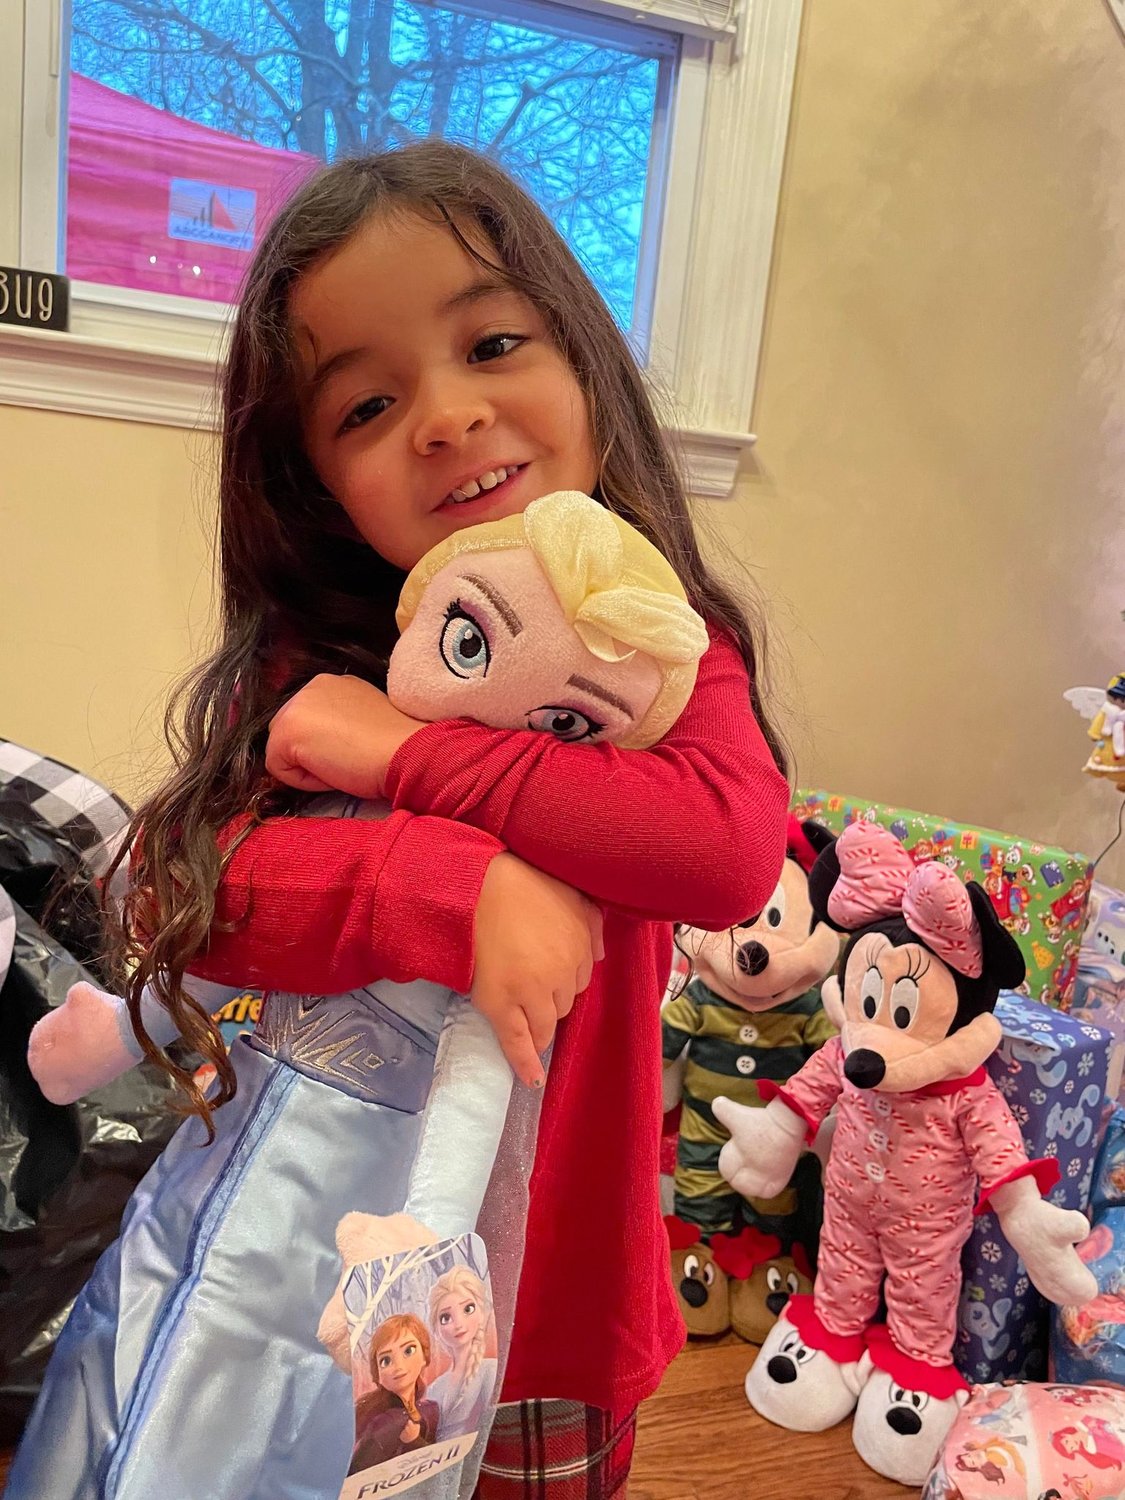 Leah Chan, 3, Idle Hour, Oakdale
“Anna doll from ‘Frozen’.”